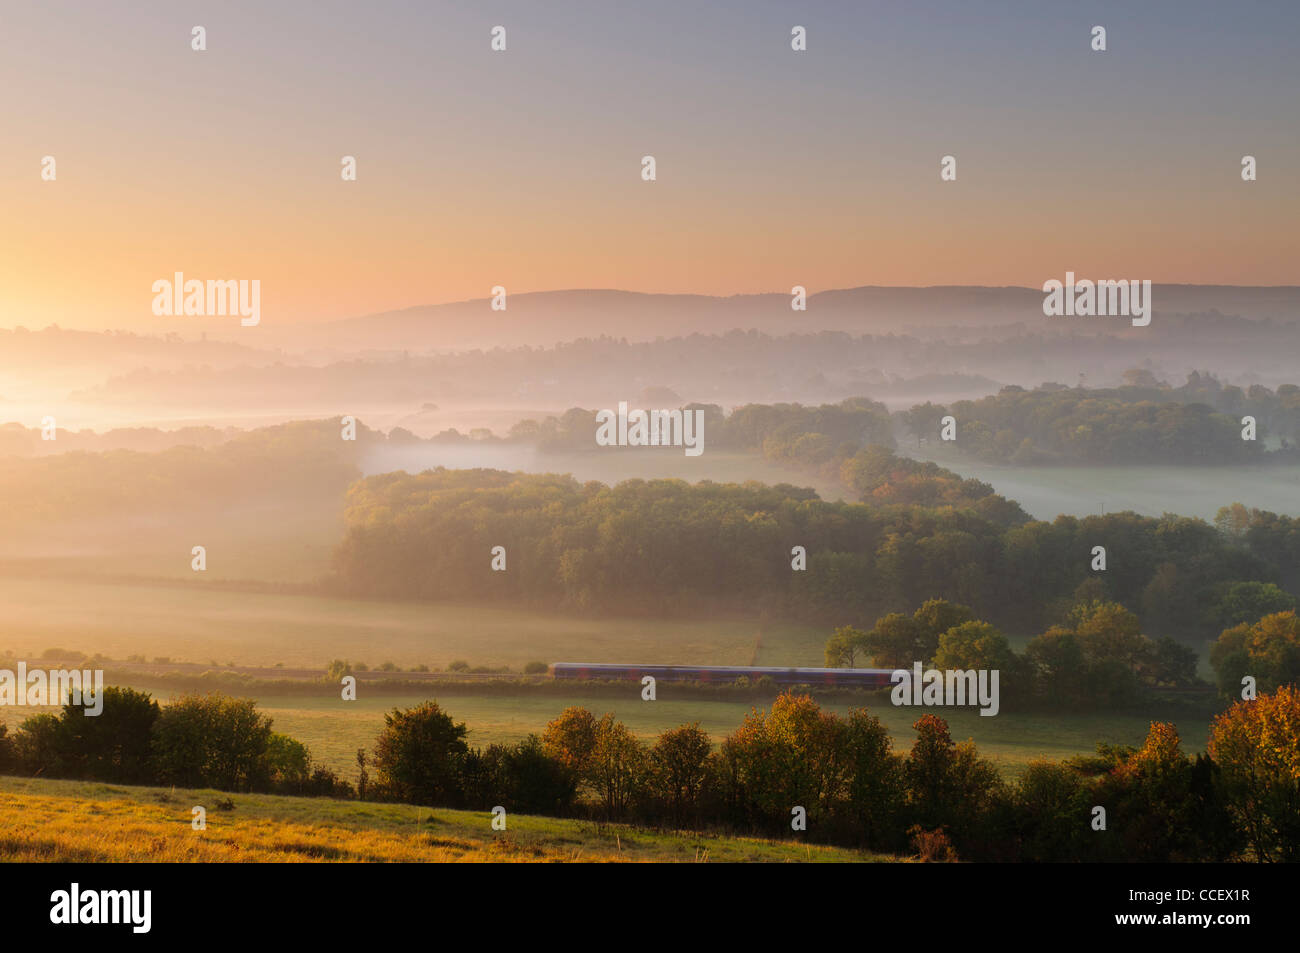 Early morning view from the edge of Ranmore Common, near Dorking in Surrey, UK. A train is heading towards Dorking direction. Stock Photo